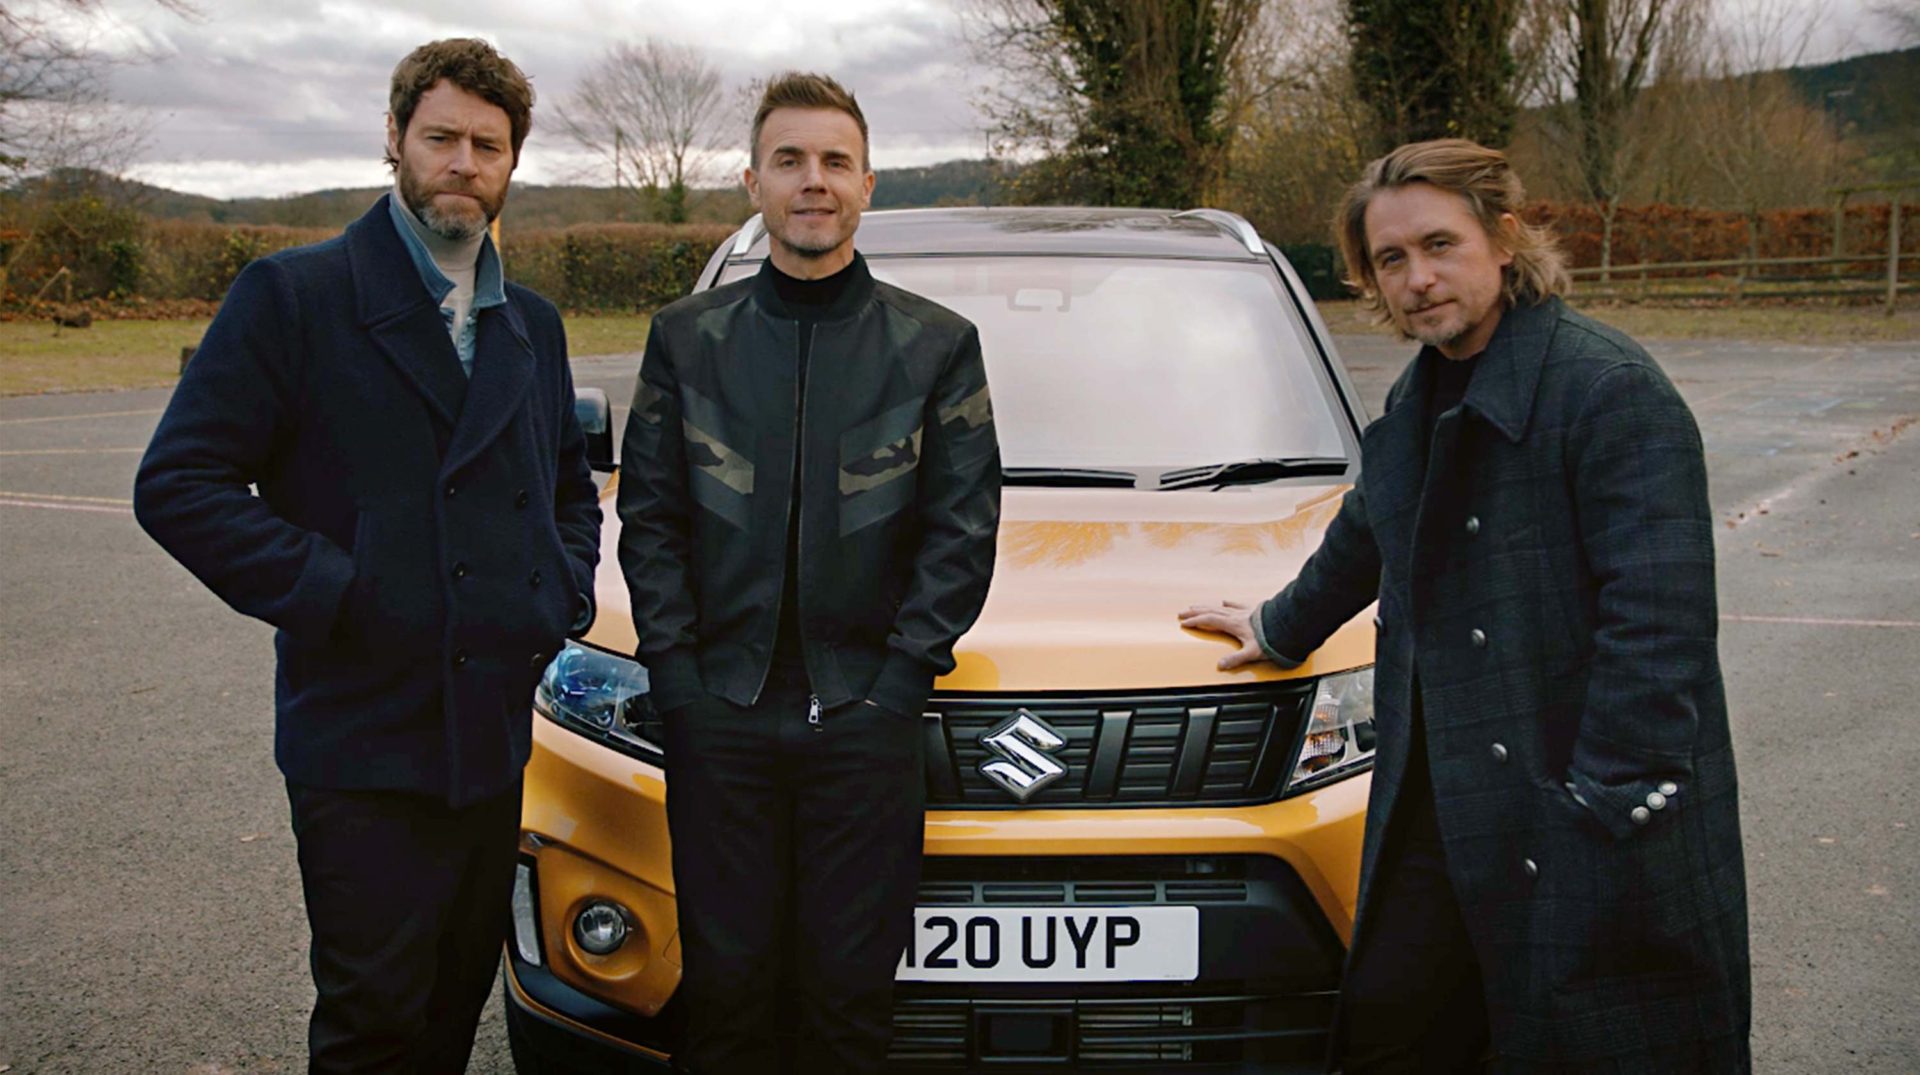 Suzuki Take Saturday Nights up a Gear with ITV and Take That